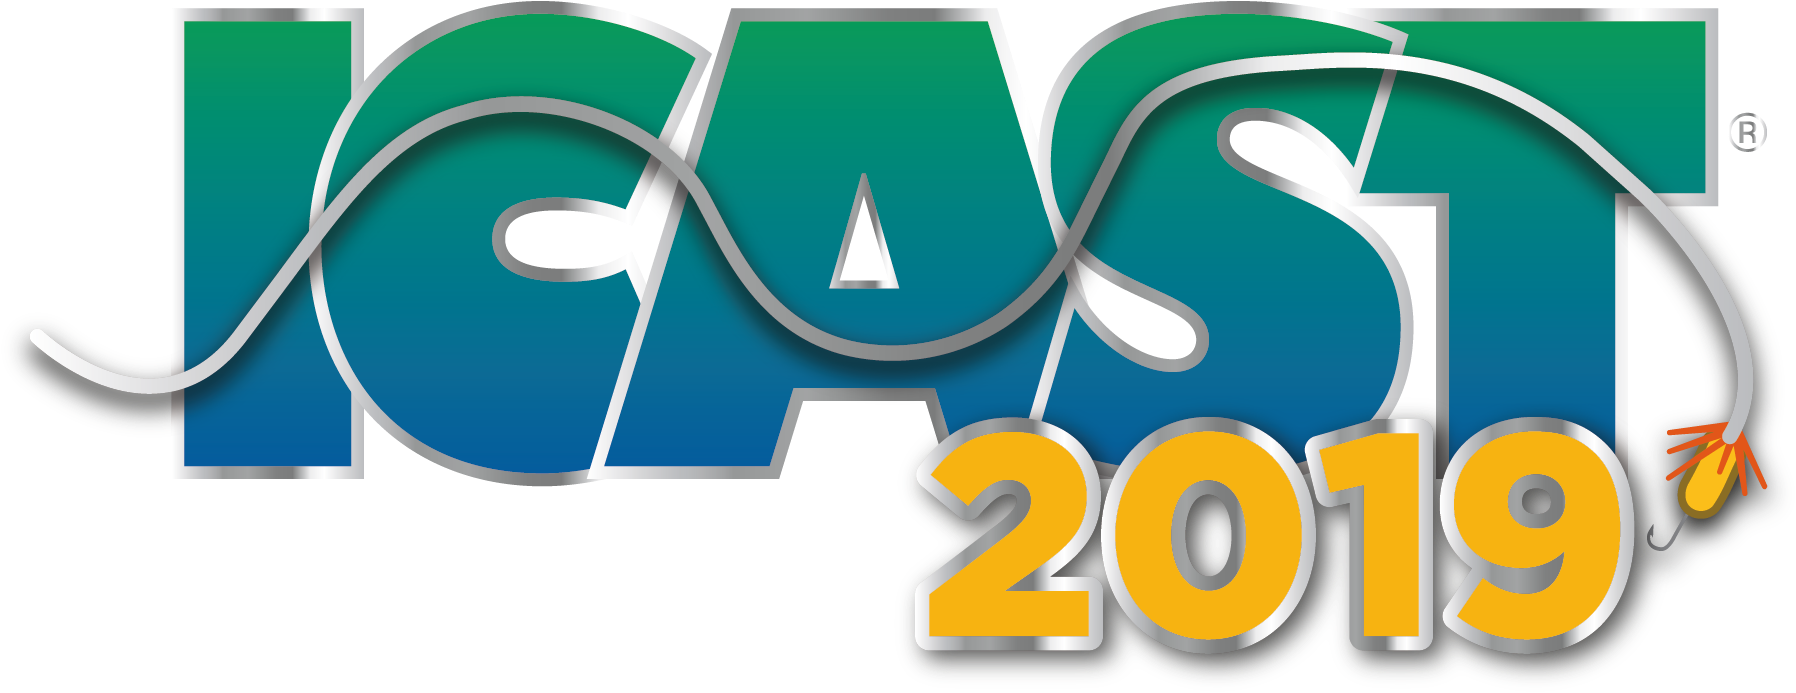 Icast Generic Logo Png - Icast 2016 Best Of Show (1955x828), Png Download